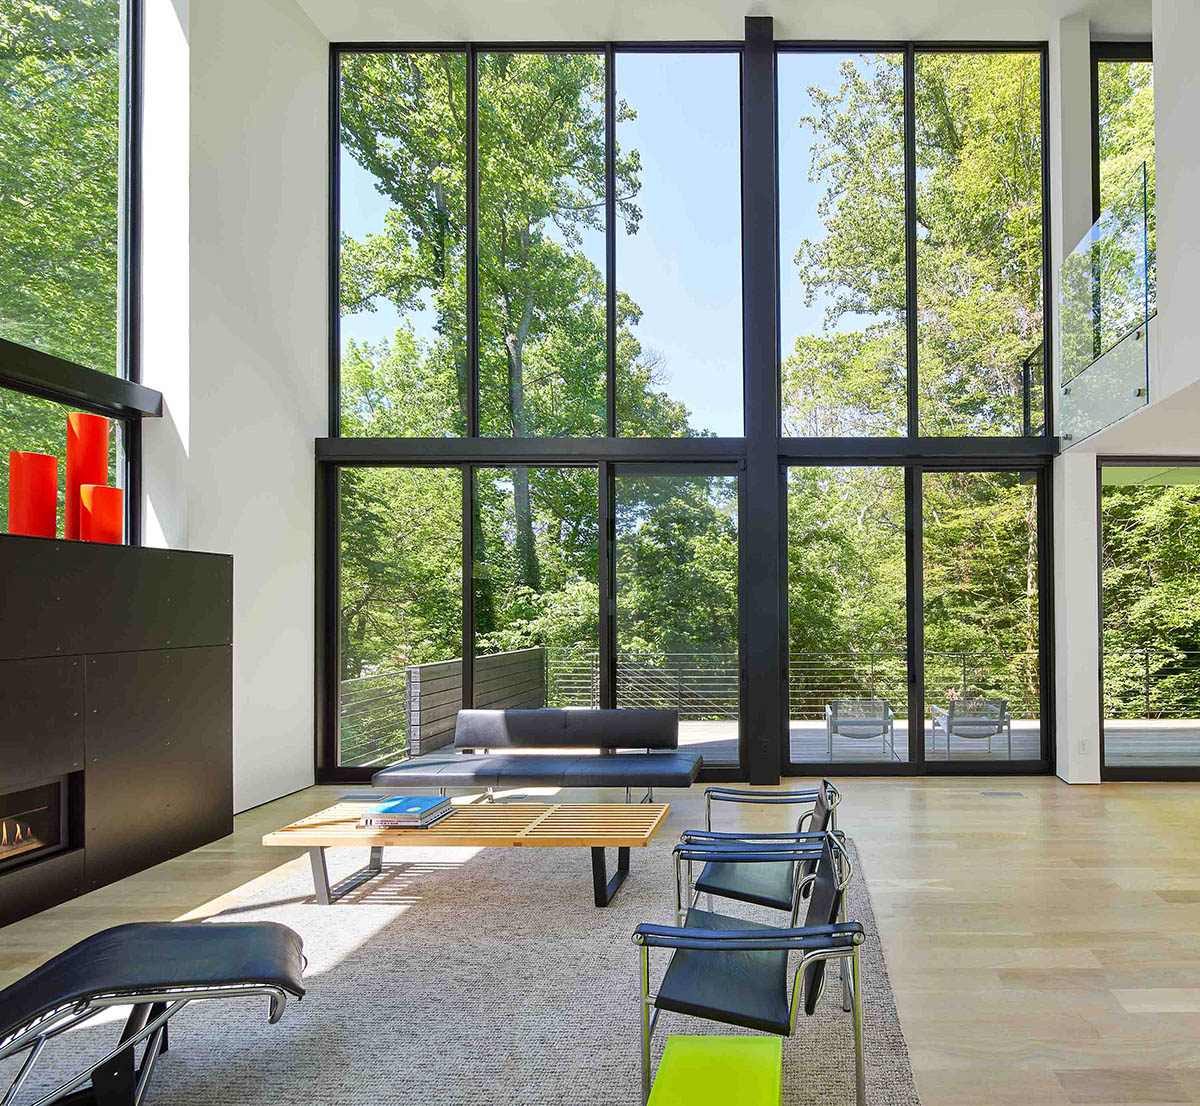 Floor-to-ceiling glass captures the grand views of nature behind the home, creating a serene indoor environment.